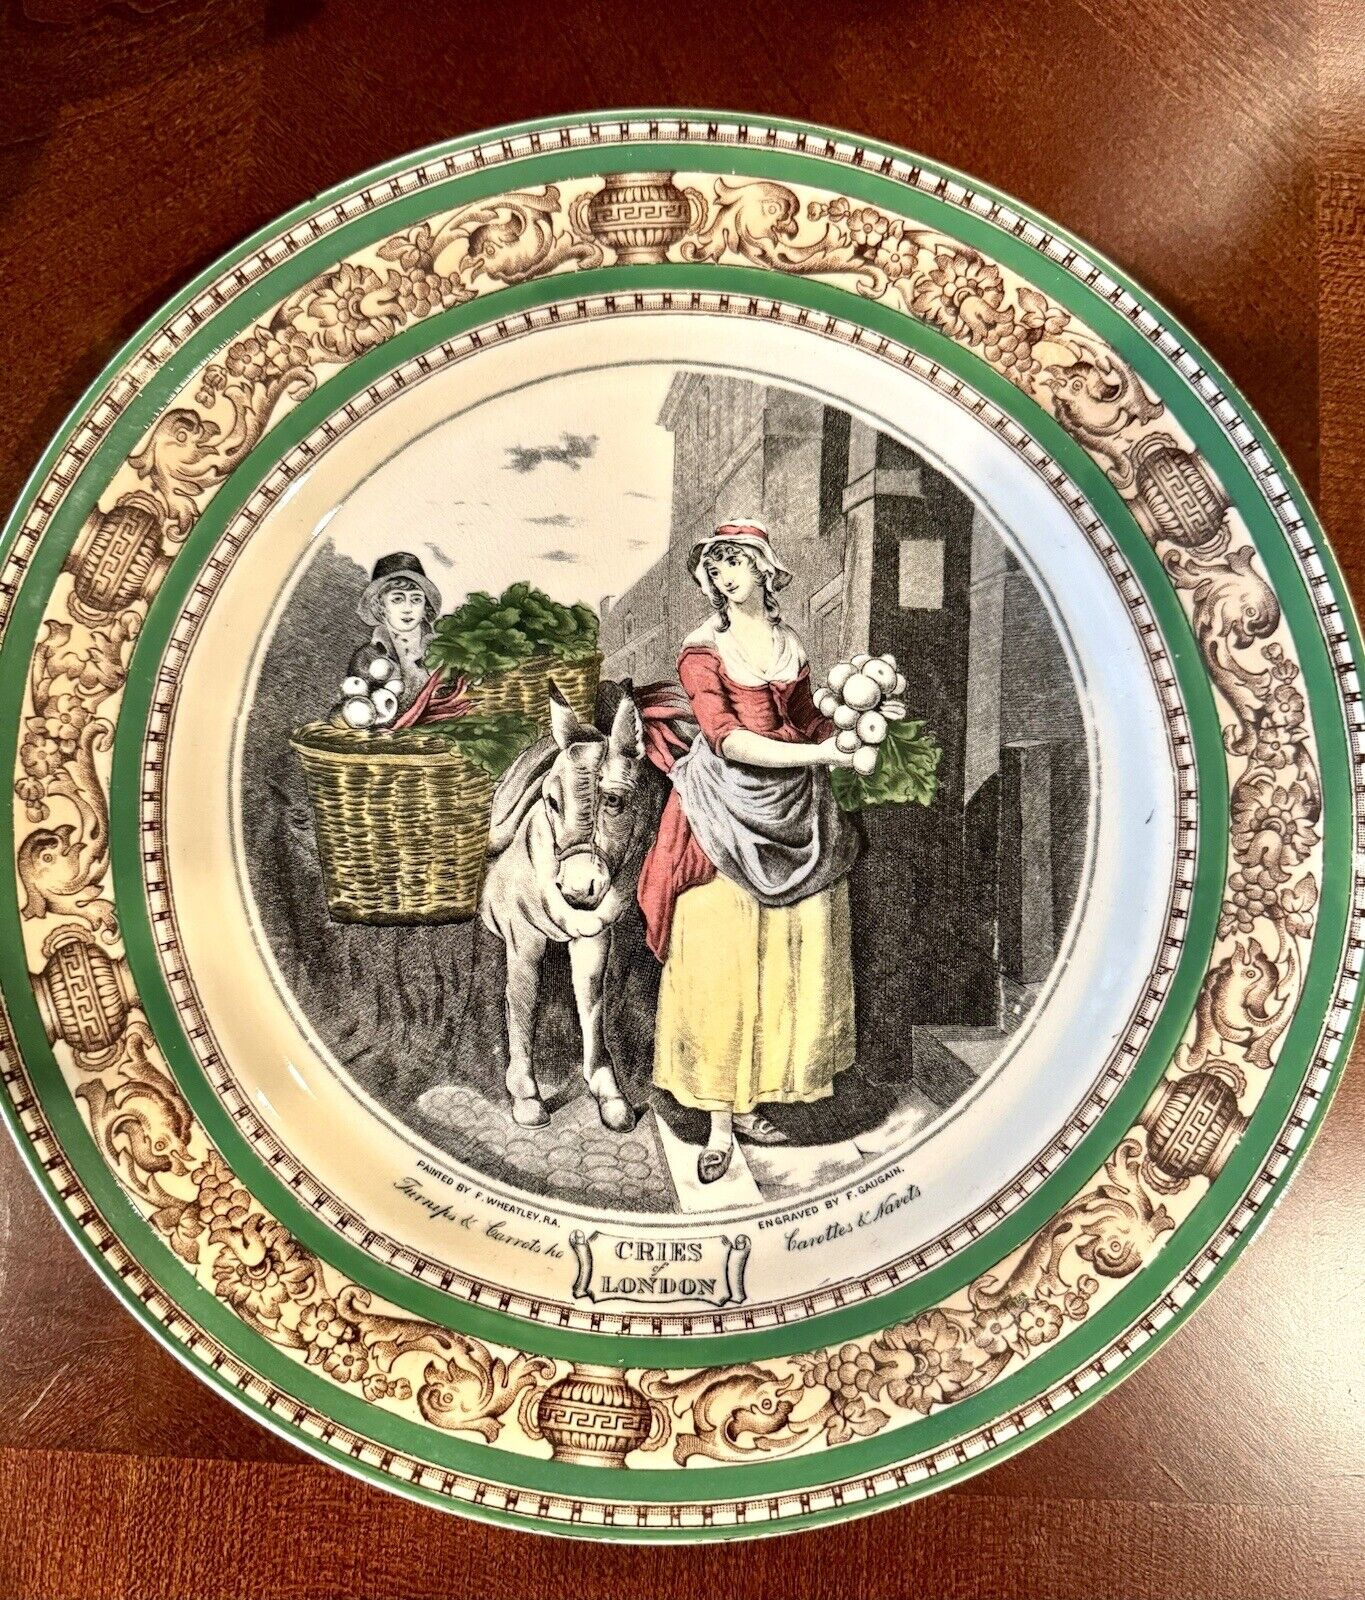 VINTAGE ADAMS CRIES OF LONDON “Fruit to Market” DECORATIVE PLATE ENGLAND 10”